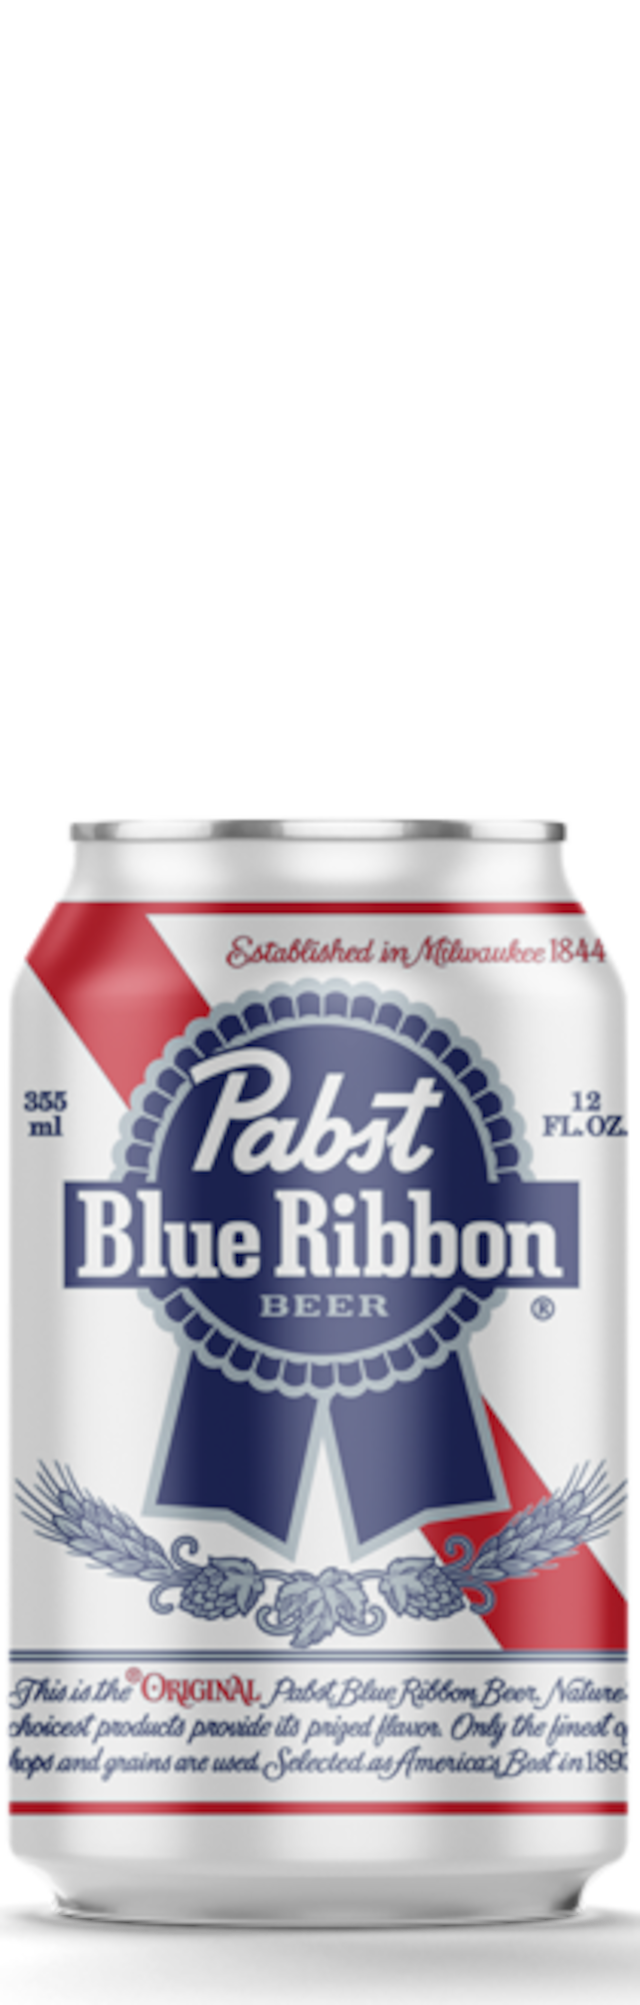 🇺🇸 Pabst Blue Ribbon CAN 355ml CAN